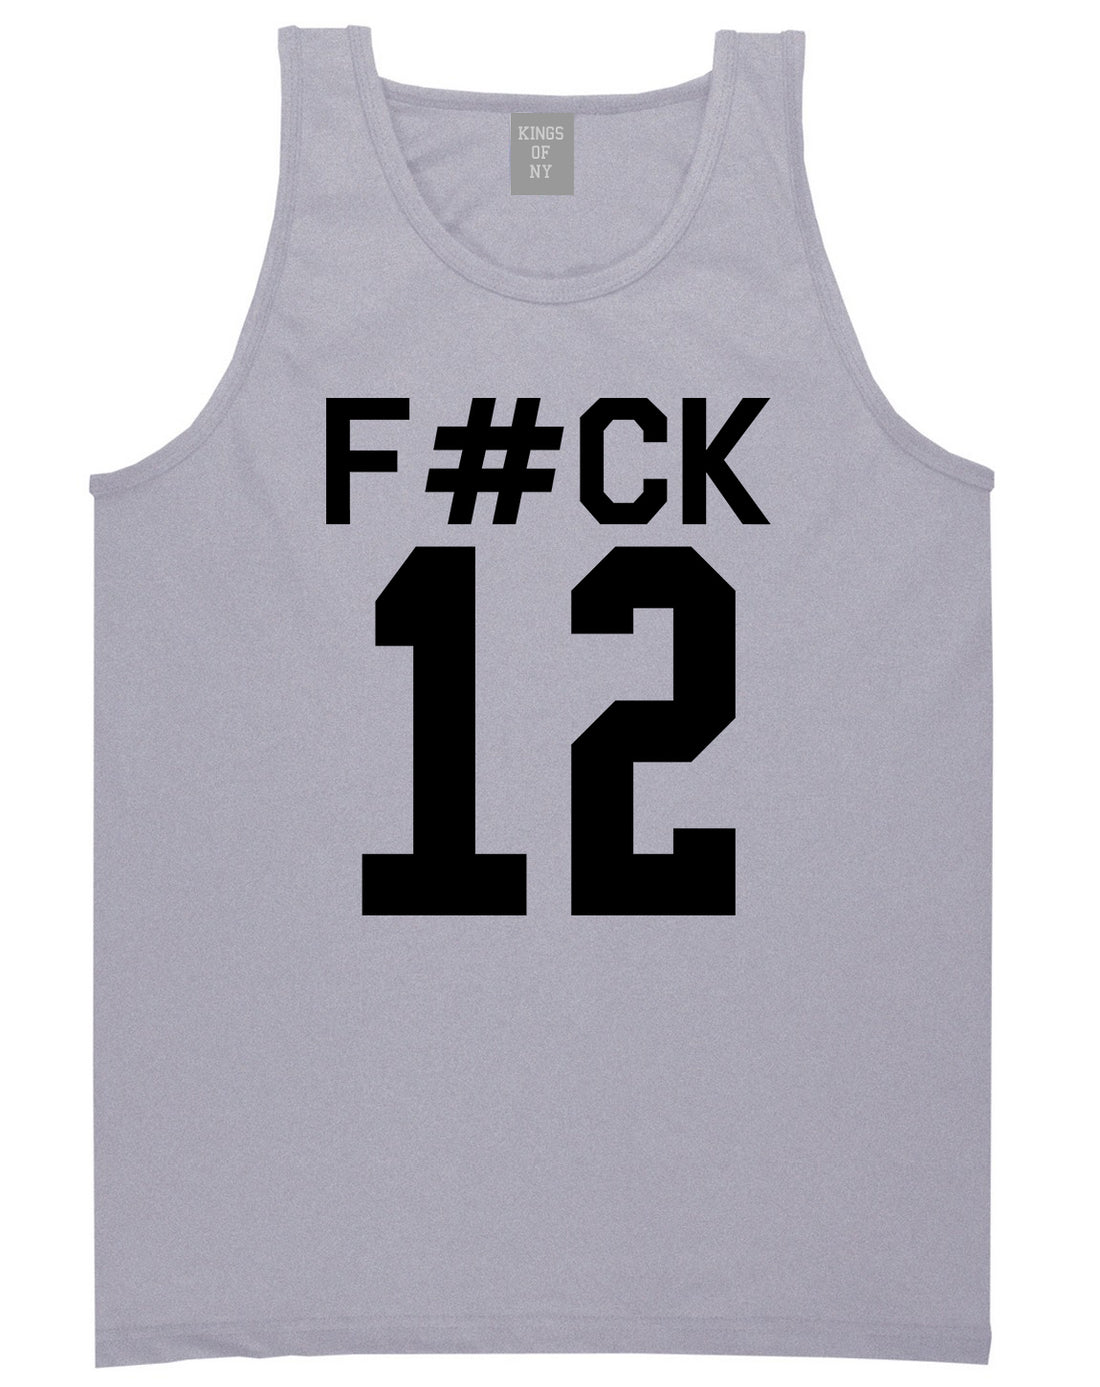 Fck 12 Police Brutality Mens Tank Top Shirt Grey by Kings Of NY